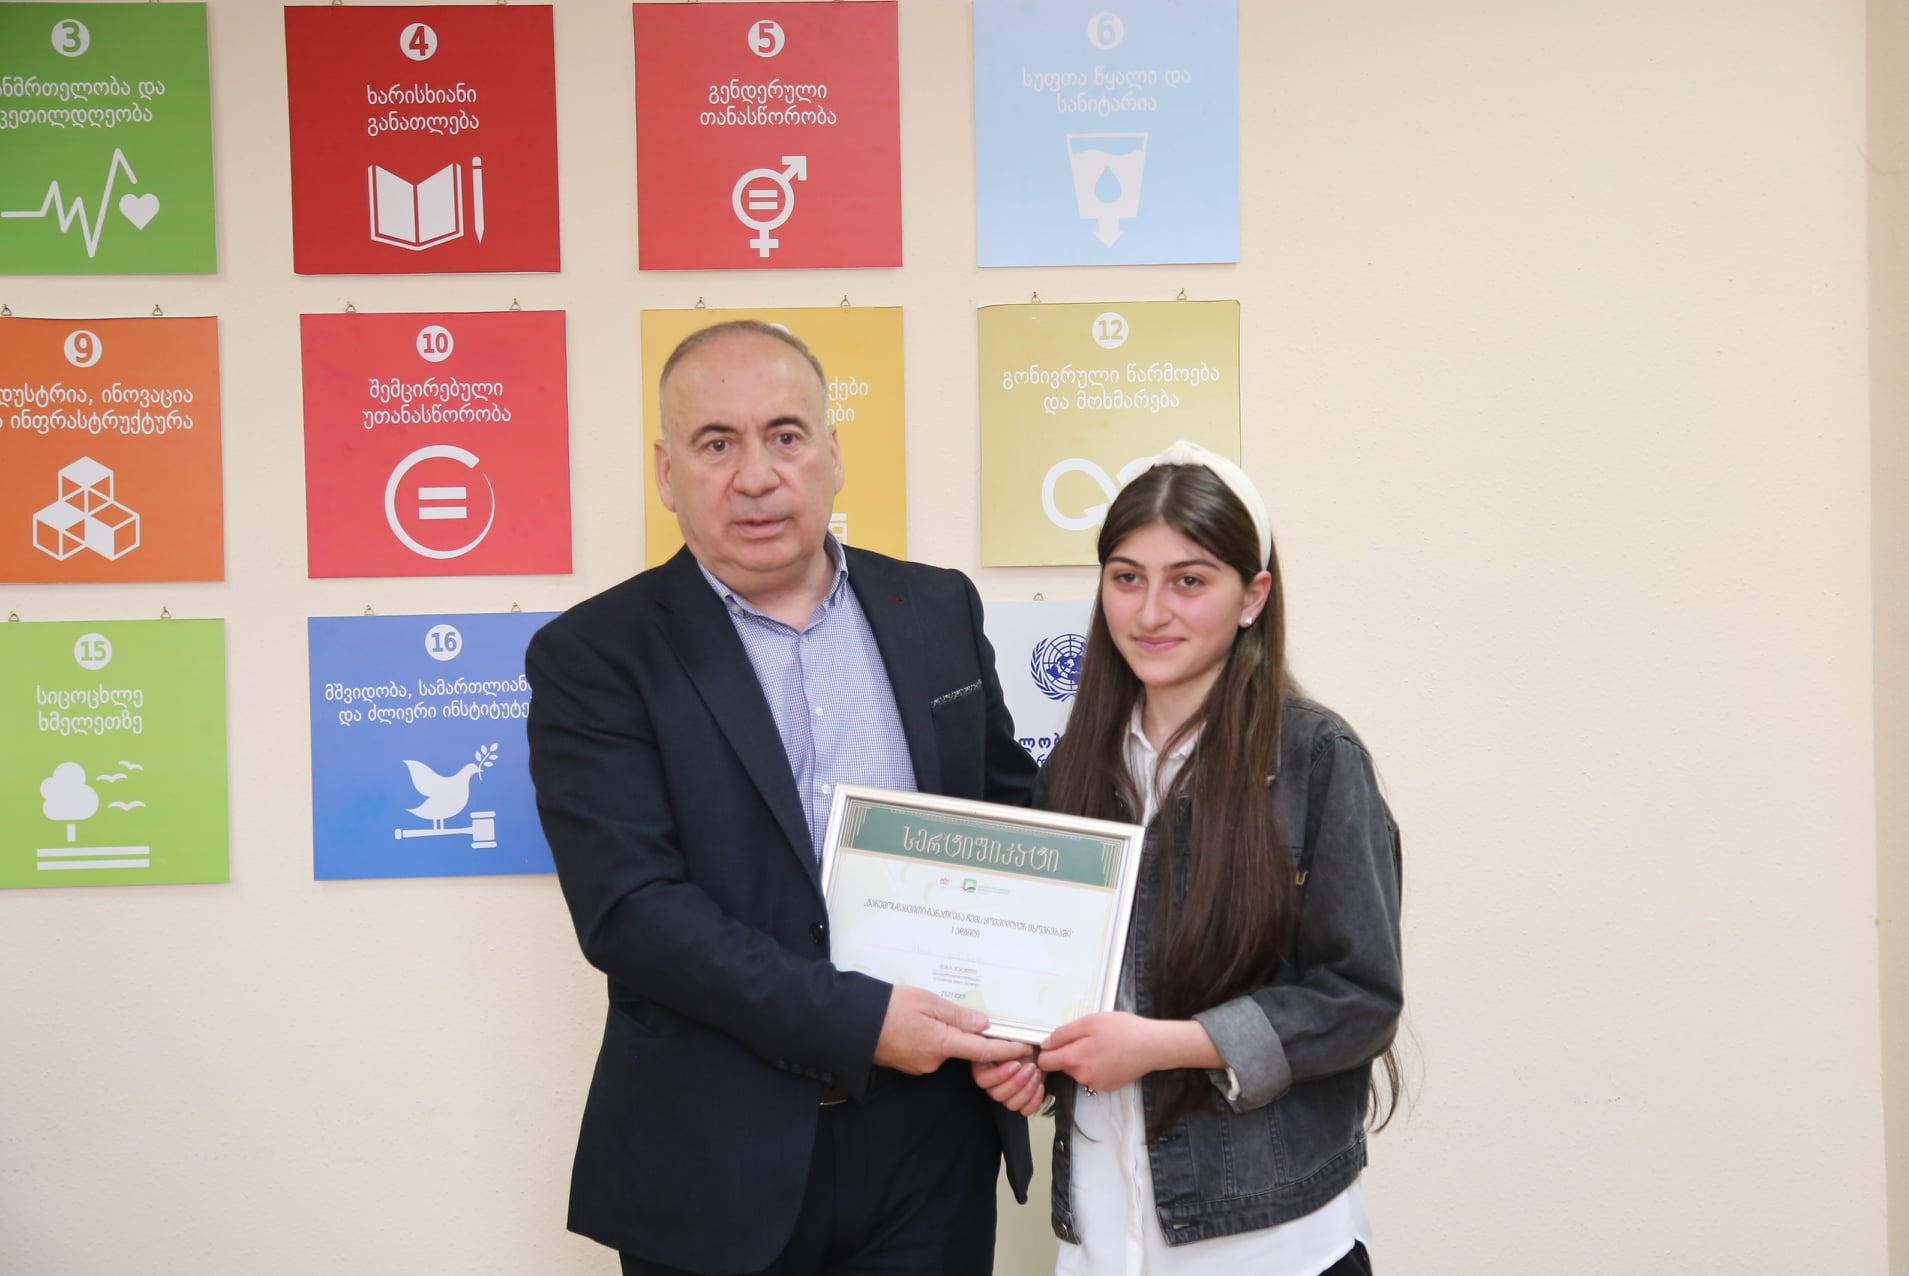 The essay contest winners for "Environmental Education in My Daily Life" were announced